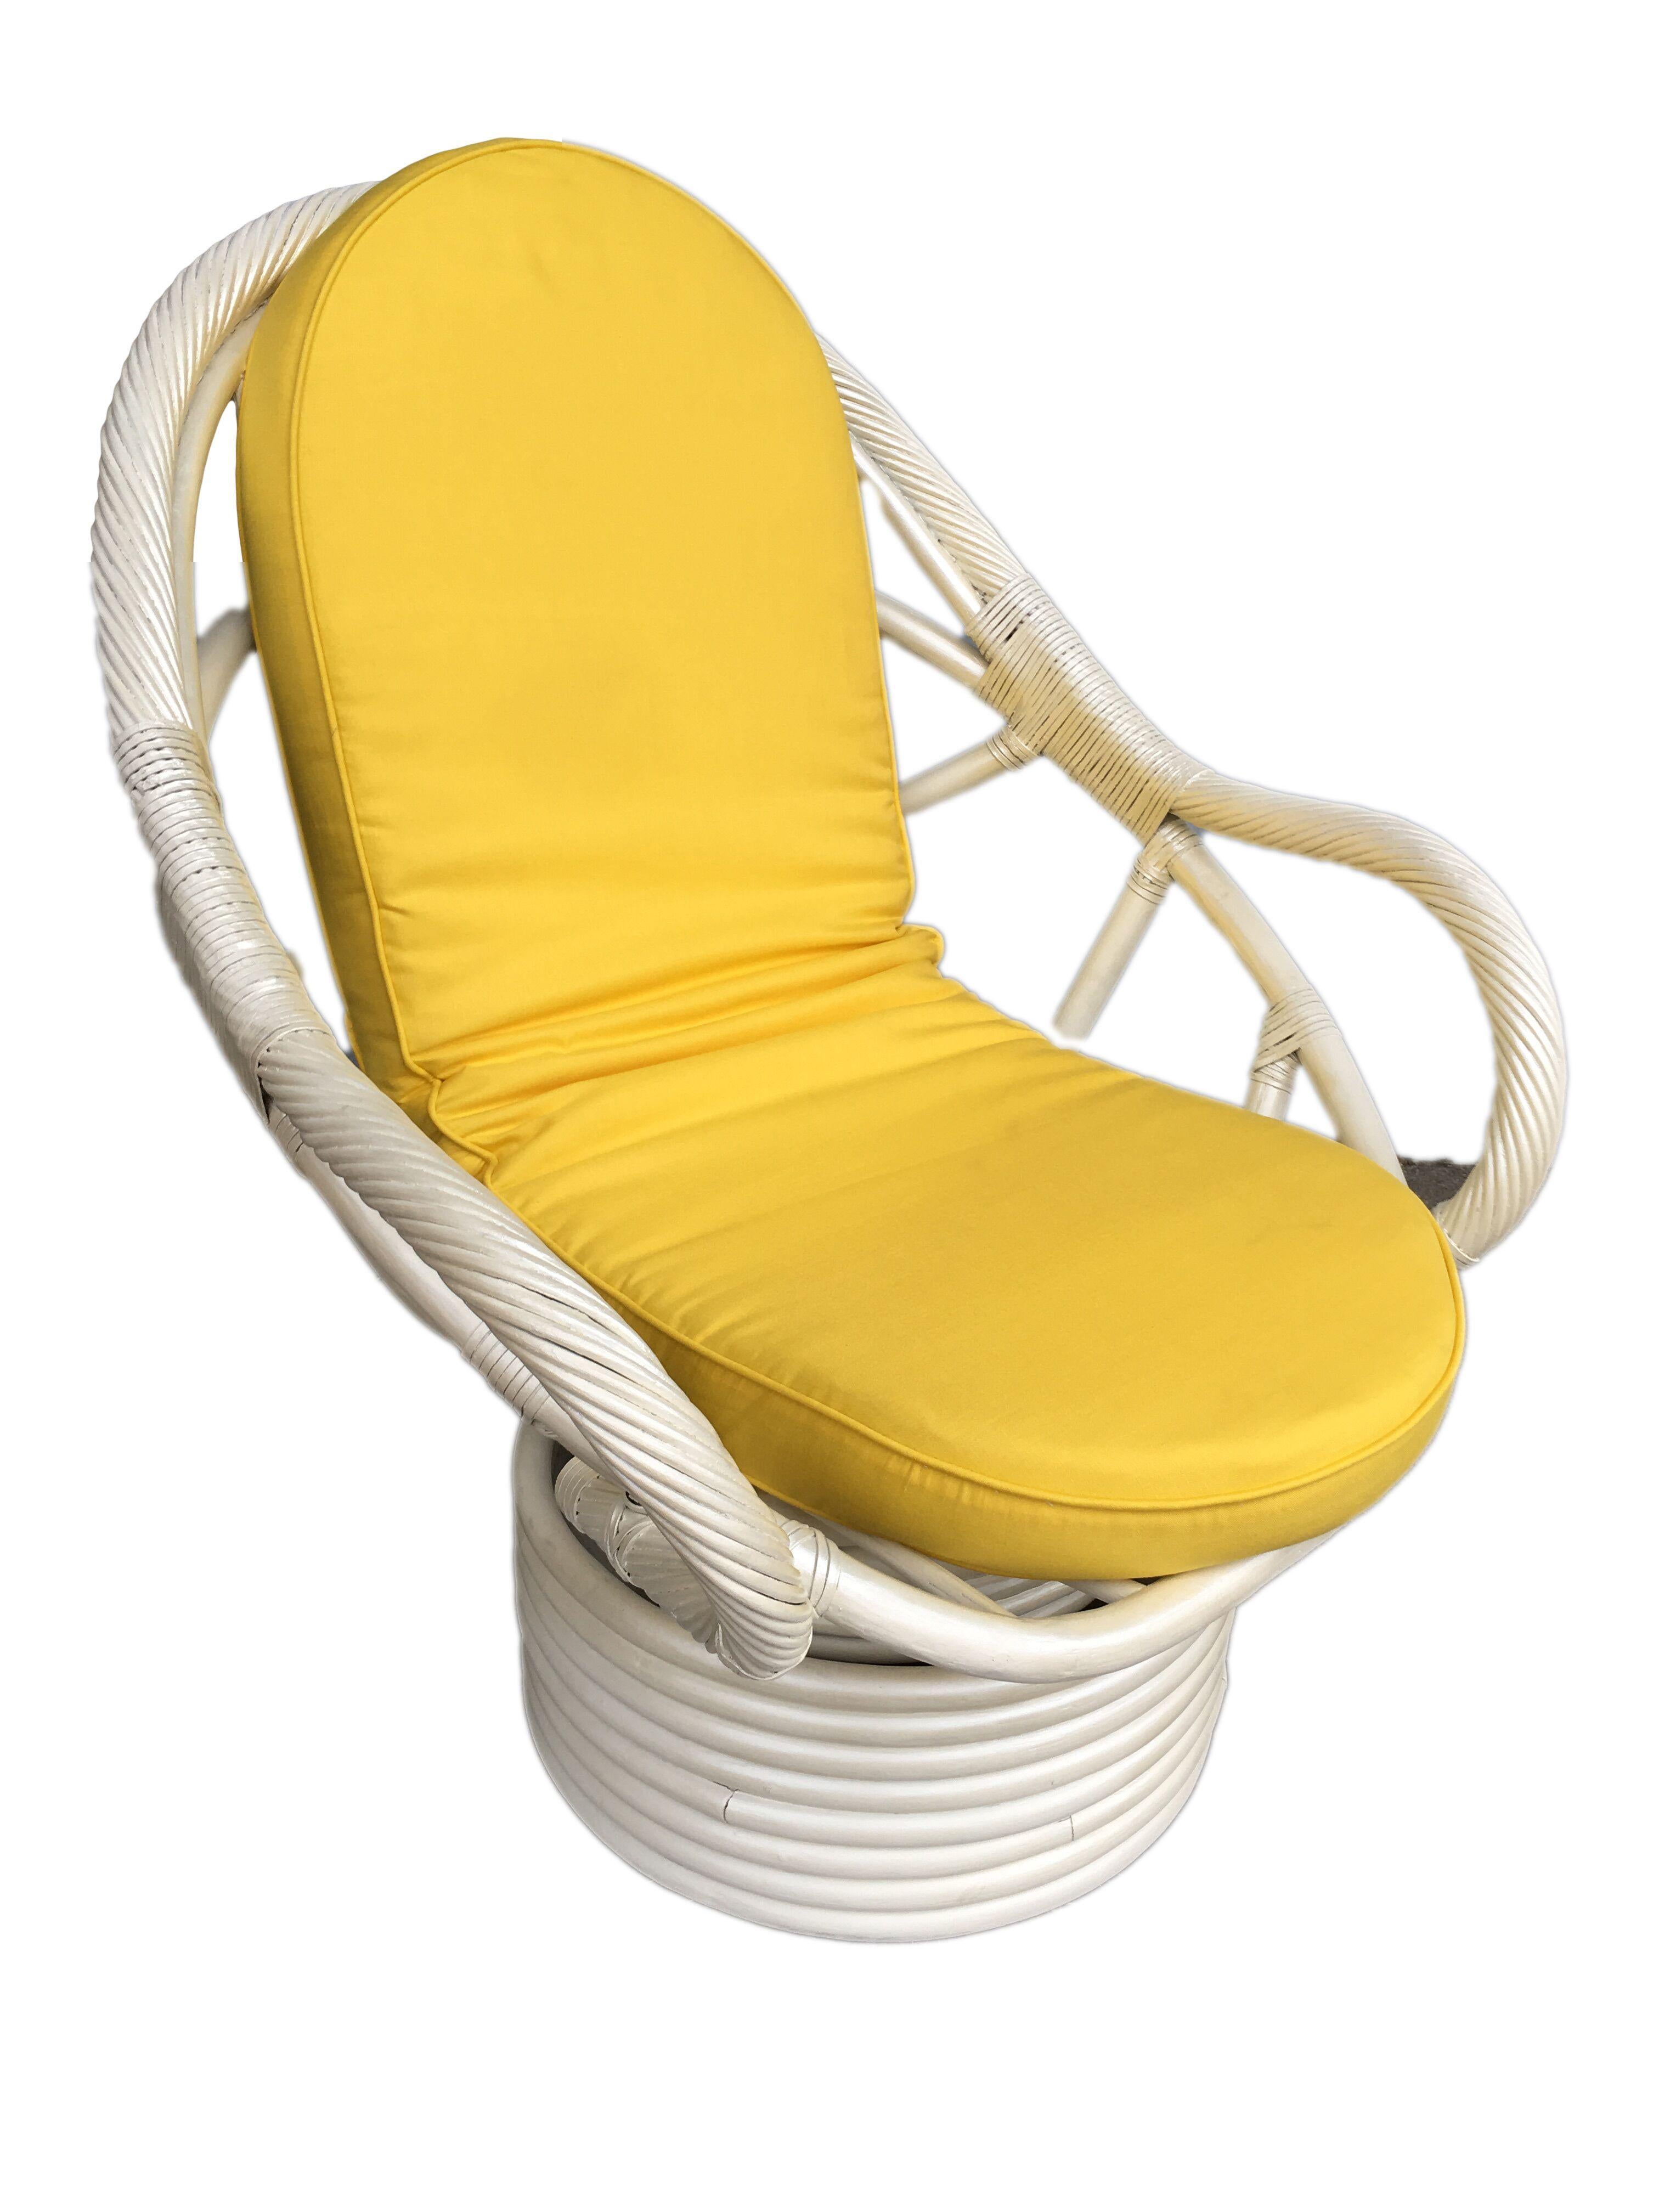 White painted rattan bucket lounge chair with swivel base featuring a ball-like shape with stick rattan wrapped arms. Circa 1970 Cushions are C.O.M. Restored to new for you. Restored to new for you. All rattan, bamboo and wicker furniture has been